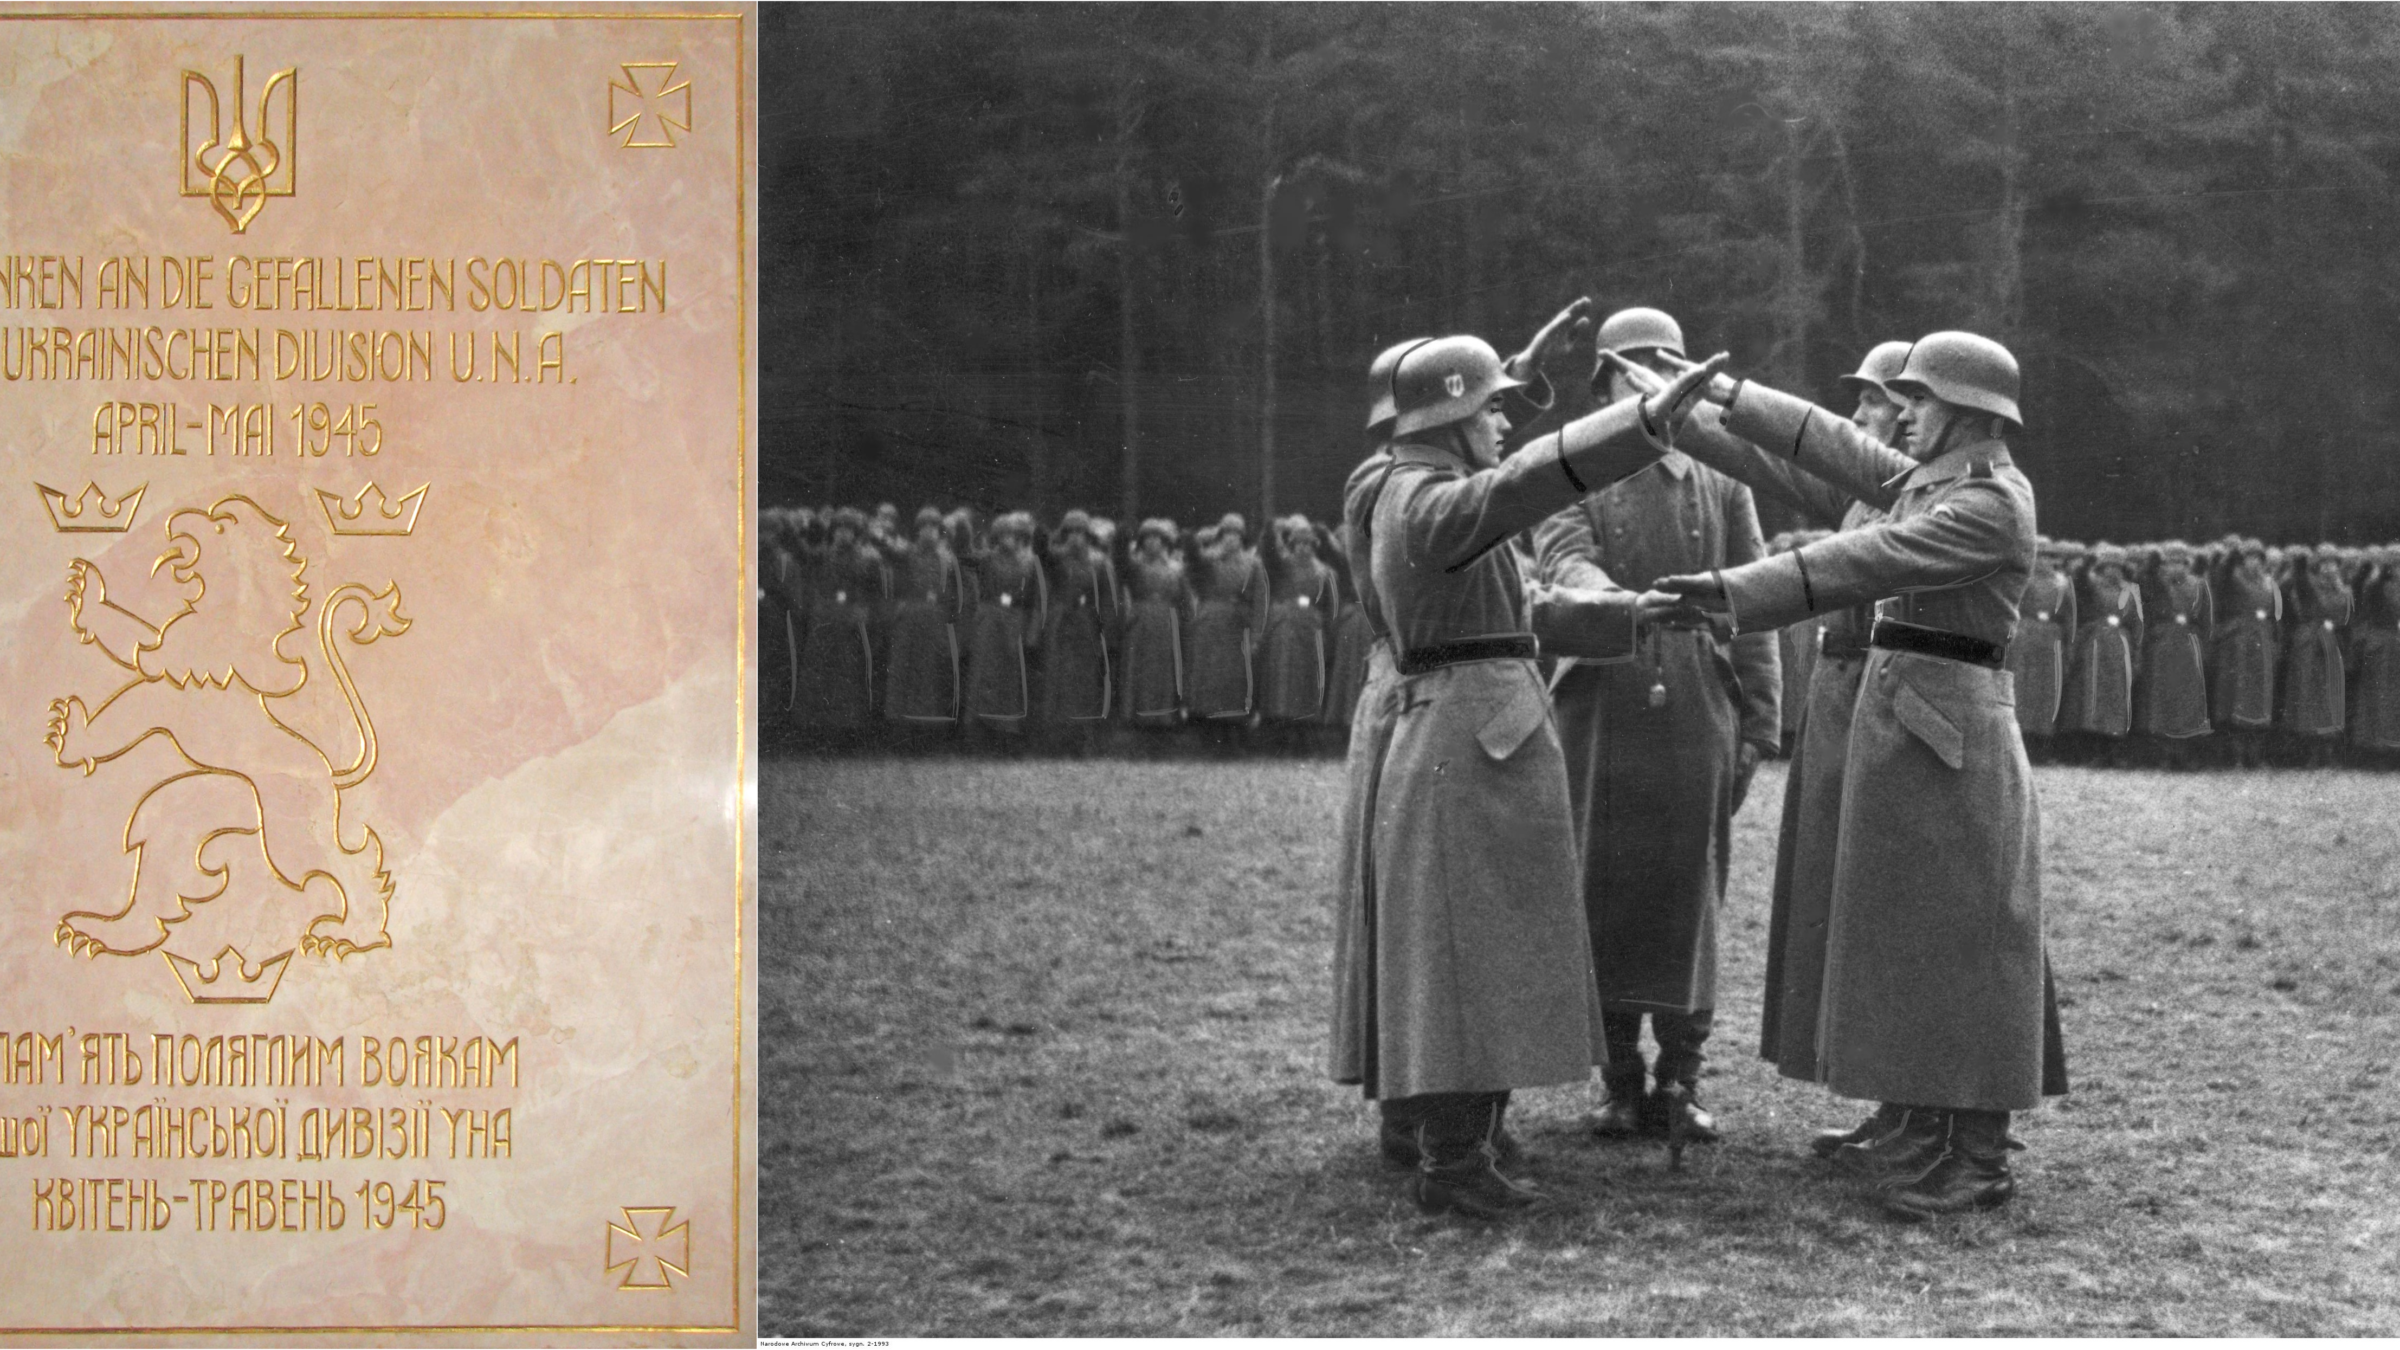 Left: SS Galichina plaque inside the Alte Kirche, Feldbach (Wikimedia Commons). Right: SS Galichina soldiers entering the division taking oaths, April 1943 (National Digital Archives Poland).